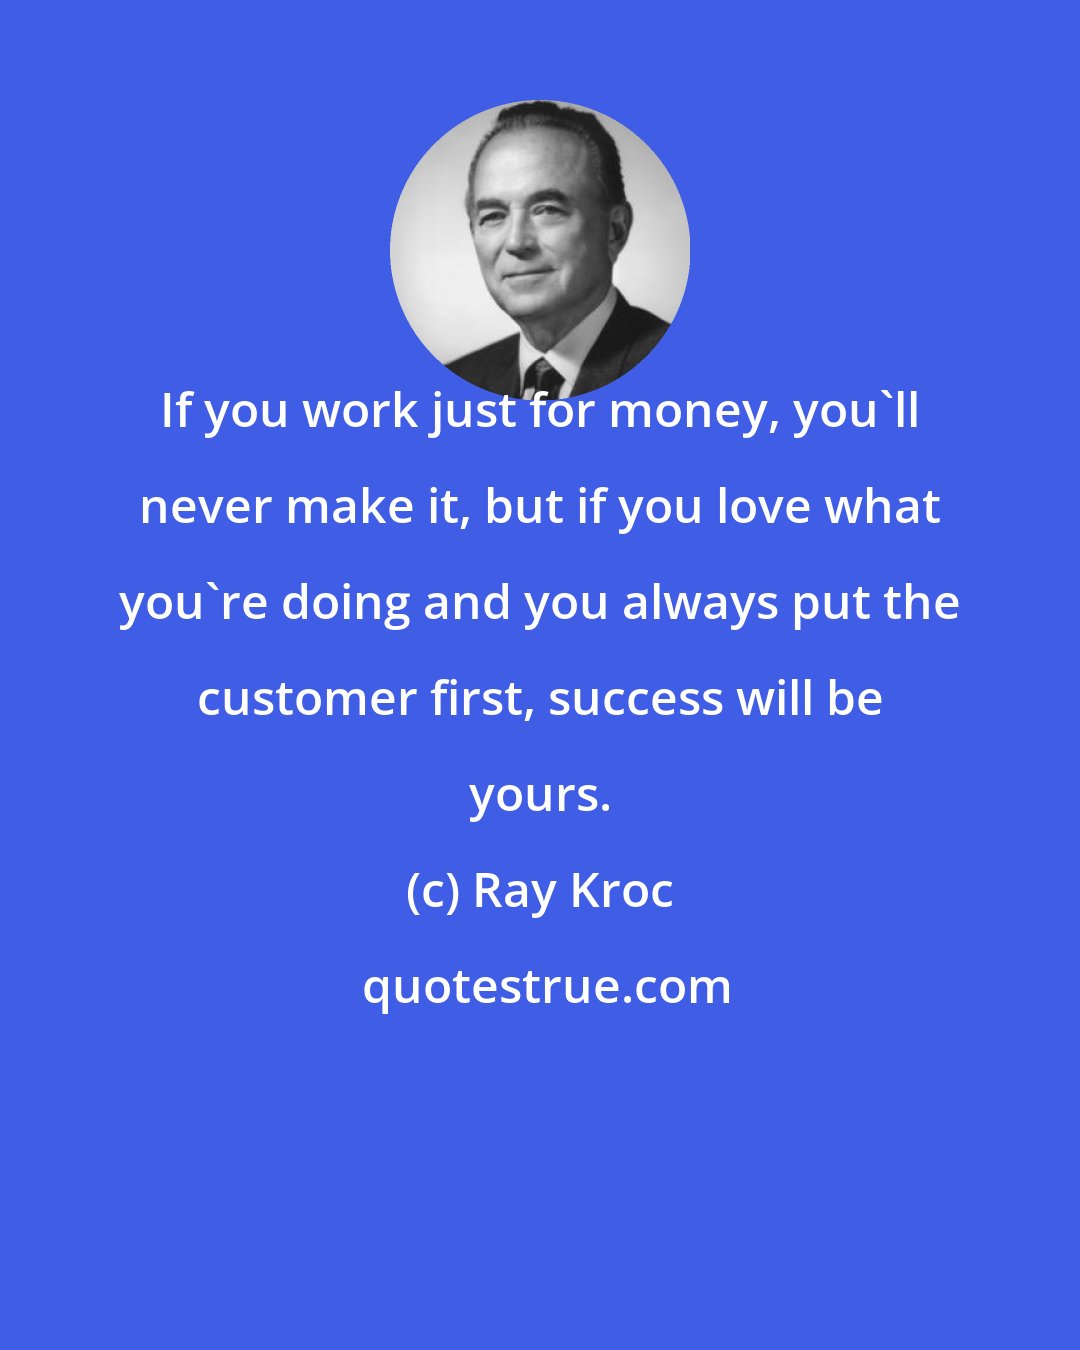 Ray Kroc: If you work just for money, you'll never make it, but if you love what you're doing and you always put the customer first, success will be yours.